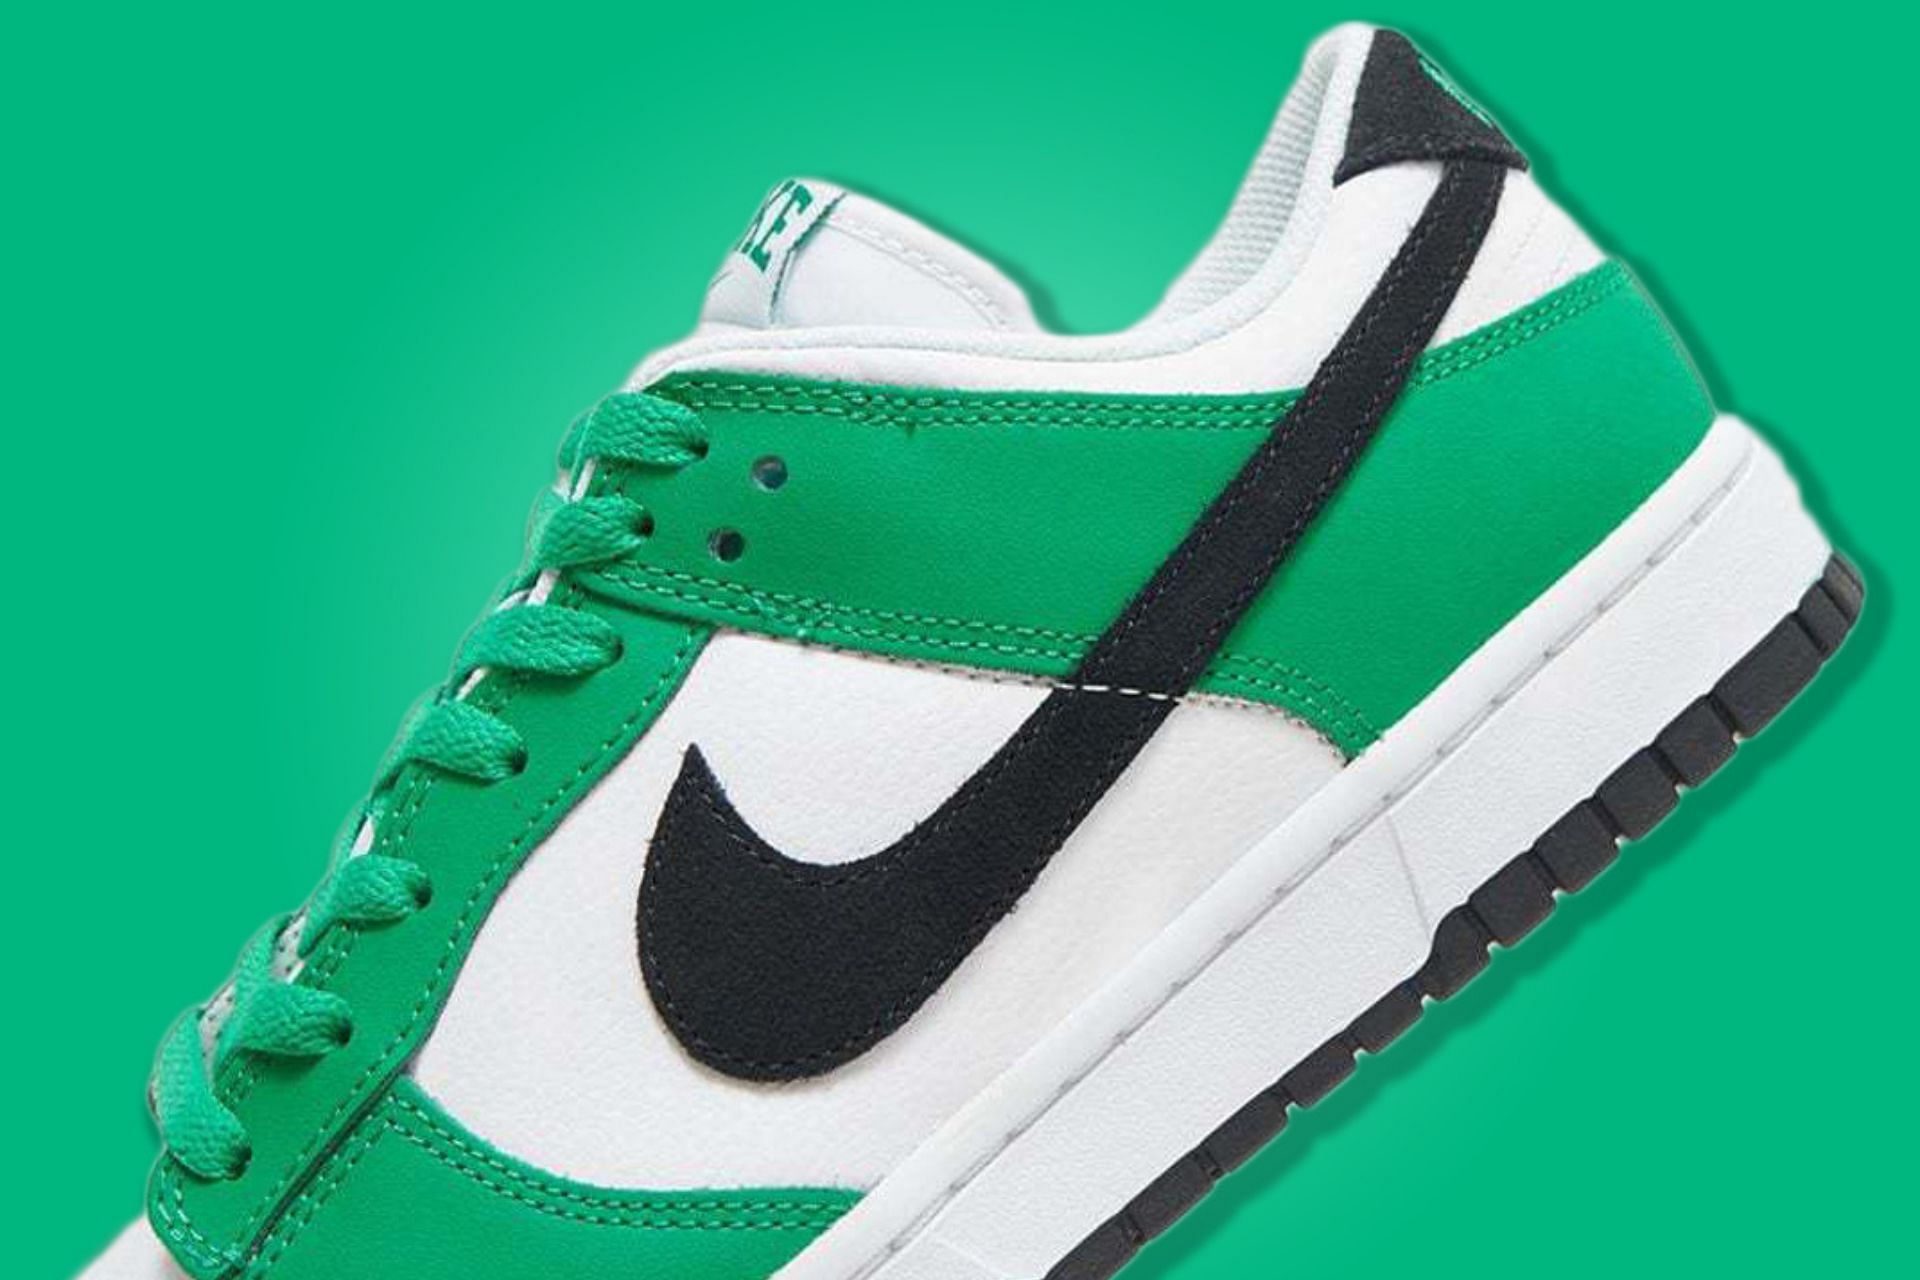 Celtics: Dunk Low “Celtics” Where to buy, price, and more details explored